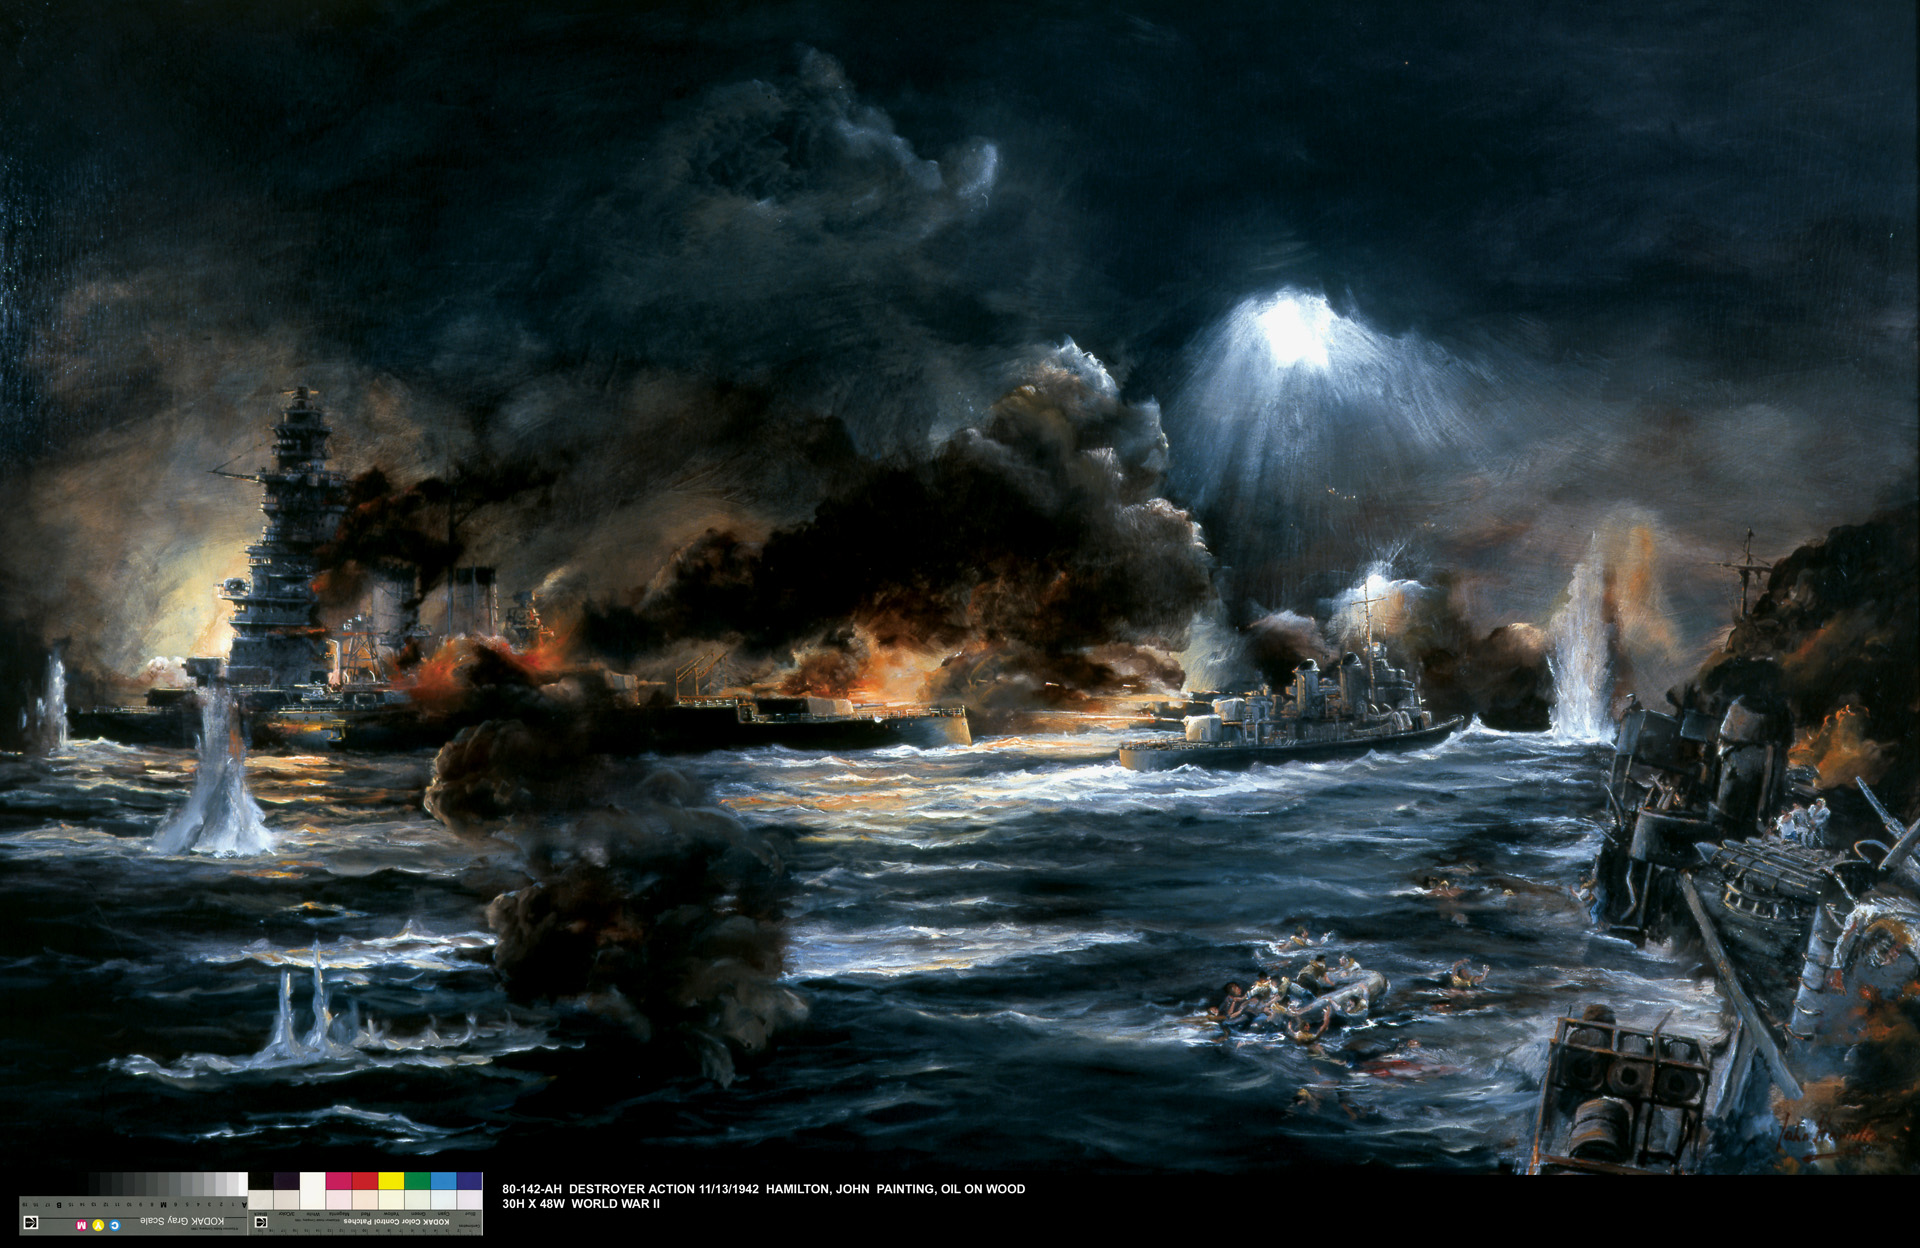 Naval artist John Hamilton depicted the night action on November 13, 1942, when eight U.S. destroyers and five cruisers engaged in an all-out slugfest against two Japanese battleships and 12 destroyers in “the Slot,” between Guadalcanal and Florida Island. The action lasted only 20 minutes but ended in a victory for the U.S. Navy. During the six-month-long campaign, the two combatants lost over 60 ships and more than 1,200 aircraft.